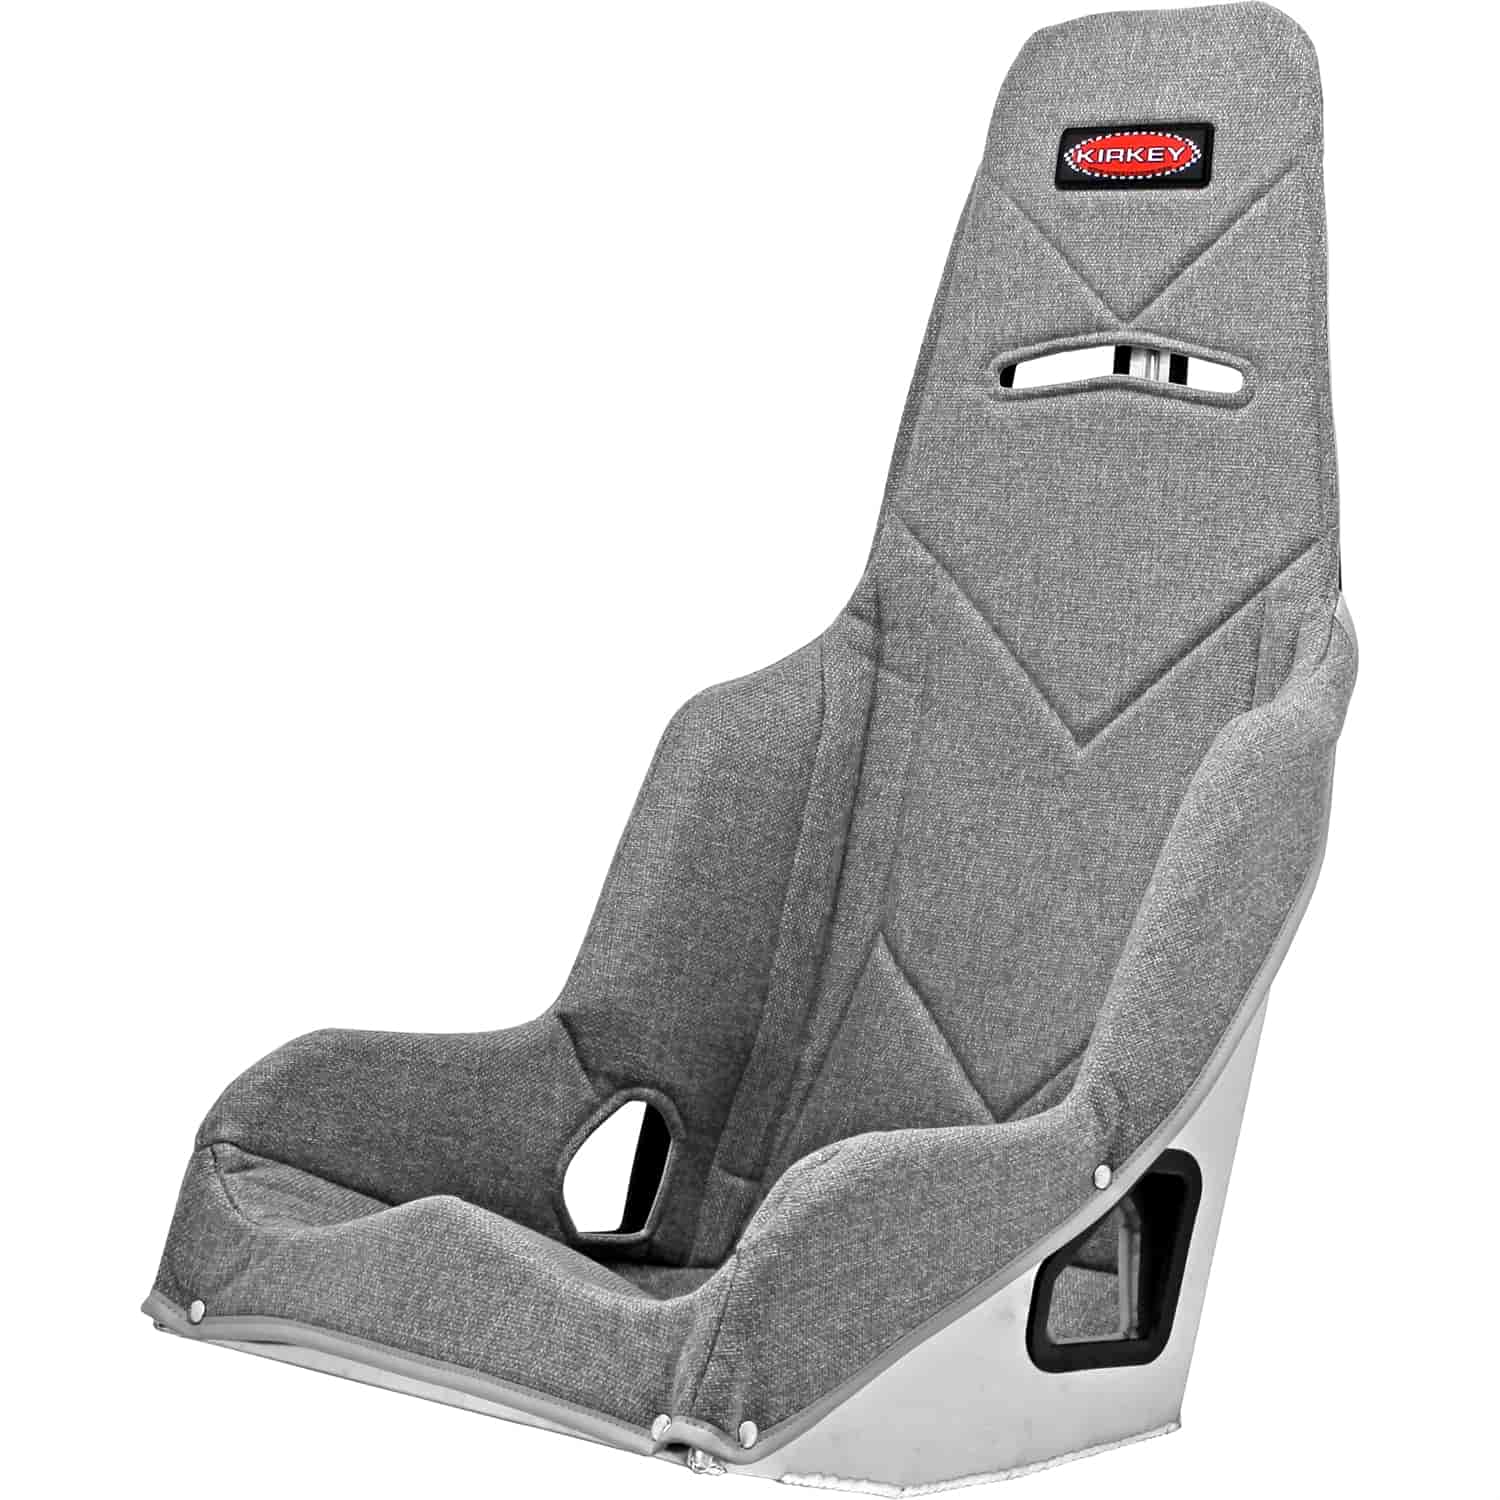 55 Series Pro Street Drag Seat Cover 15" Hip Width